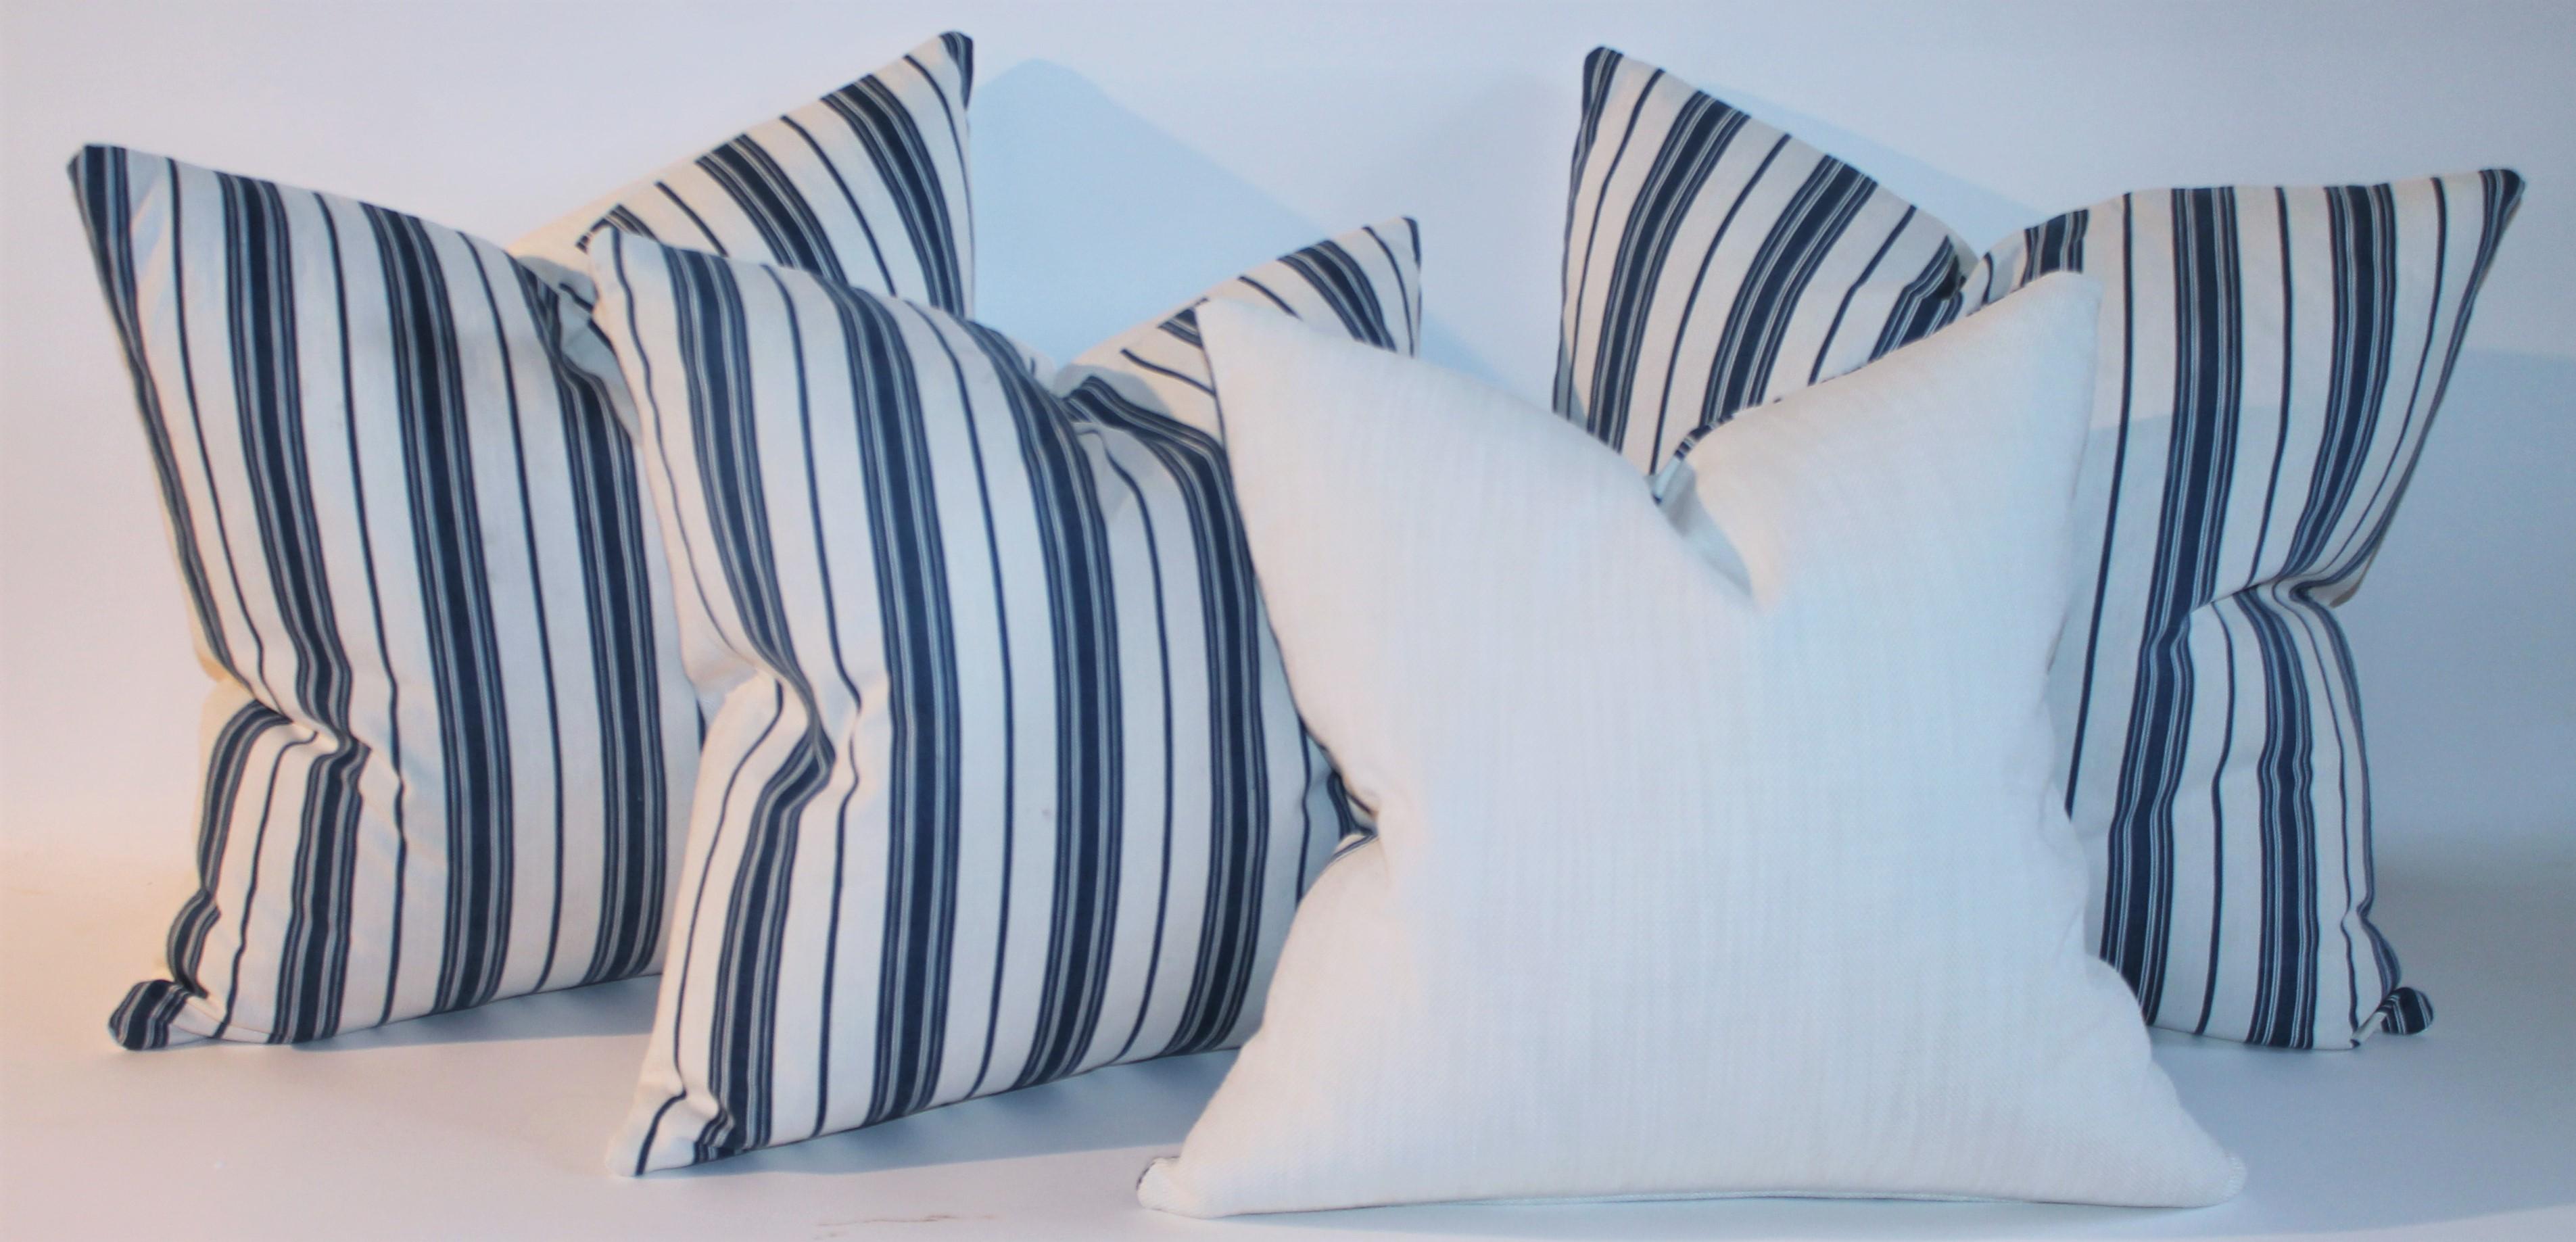 19thc blue & white ticking pillows with white linen backing. There are two pairs 20 x 20 and 22x22.

Pair of 22 x 22 
pair of 20 x 20.